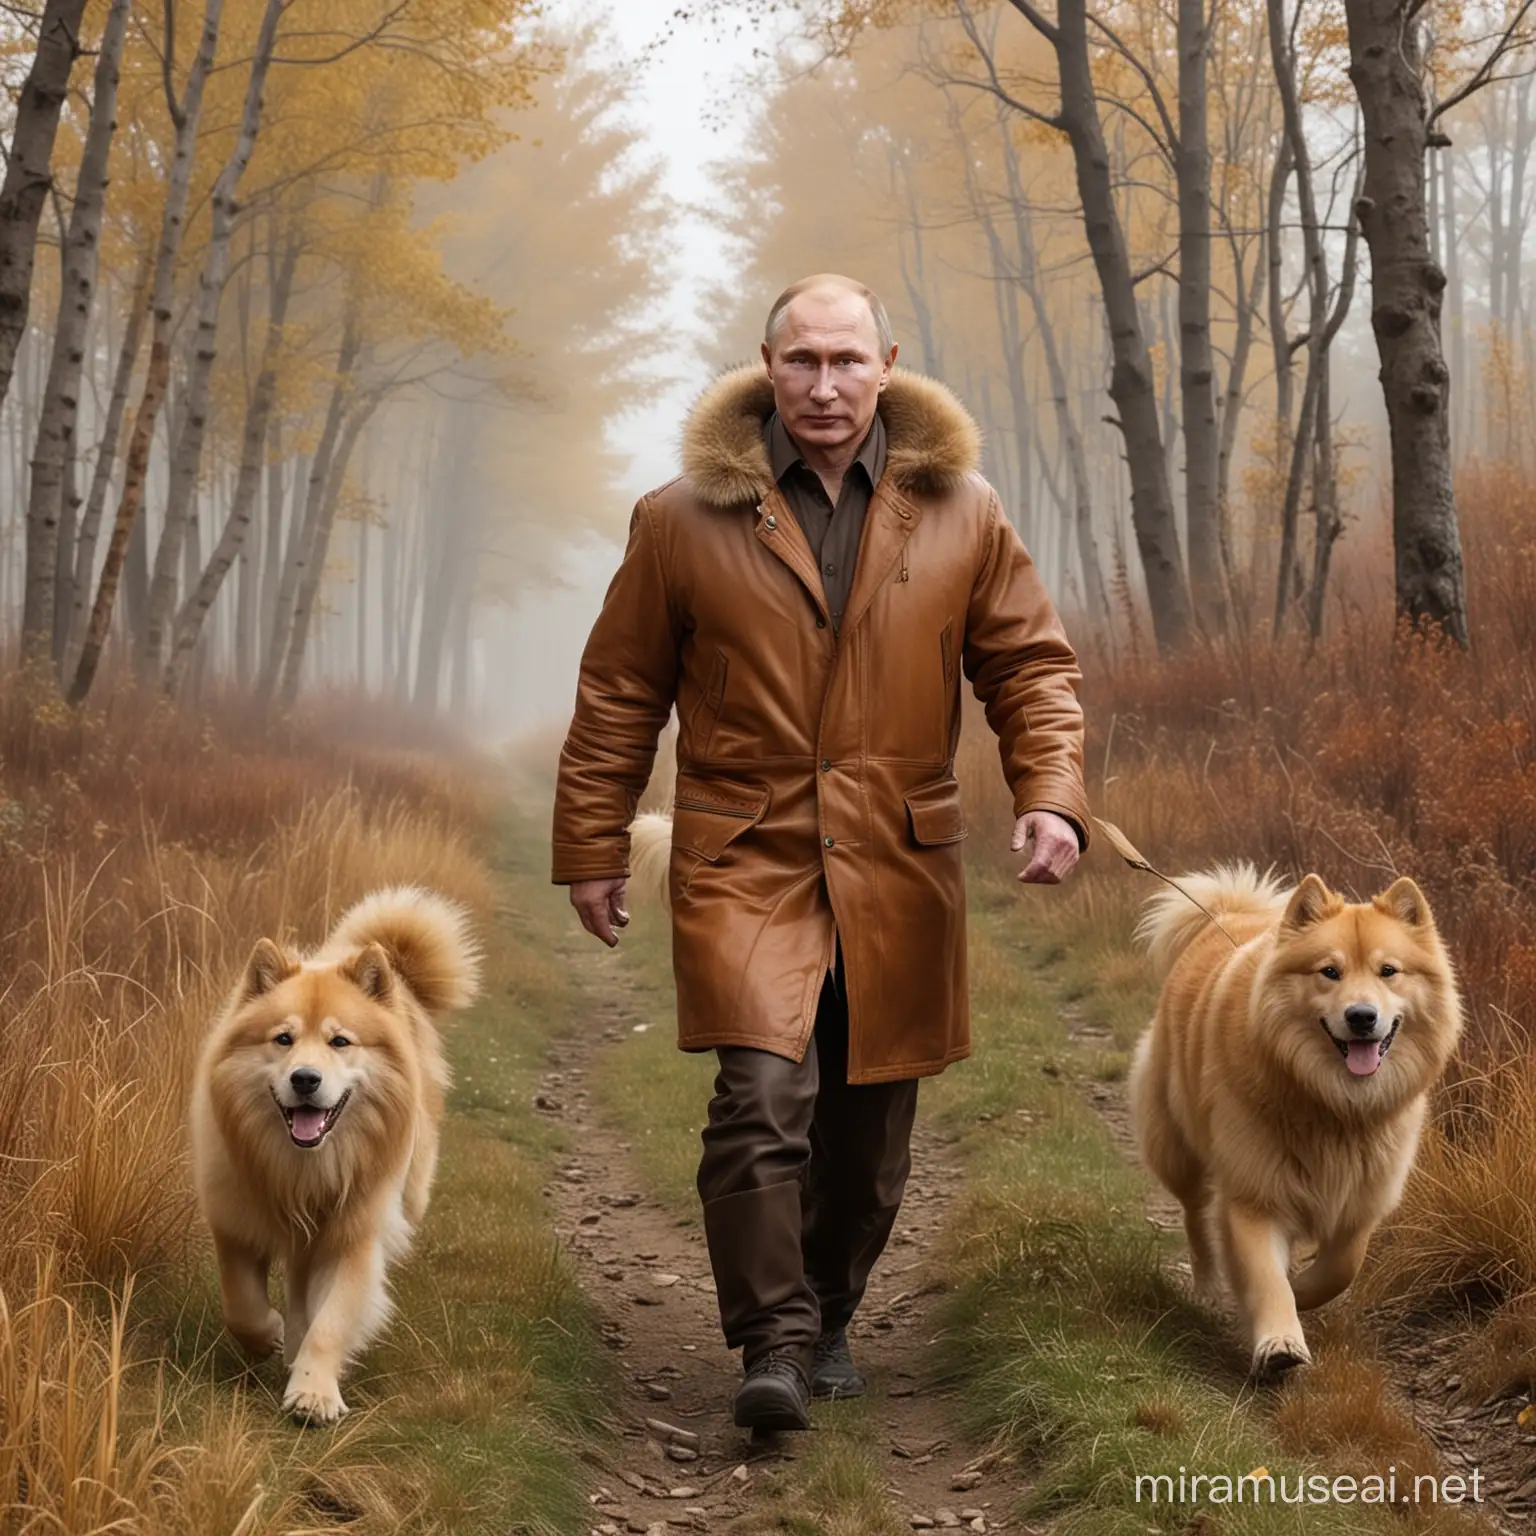 wideview, ultra detailed,65 years old real face putin fast running , wear brown lether coat,behind  him a strong tibet long golden fur dog ,show  of sharp teeth to chase him, dense grass forest, autumn, mist around,